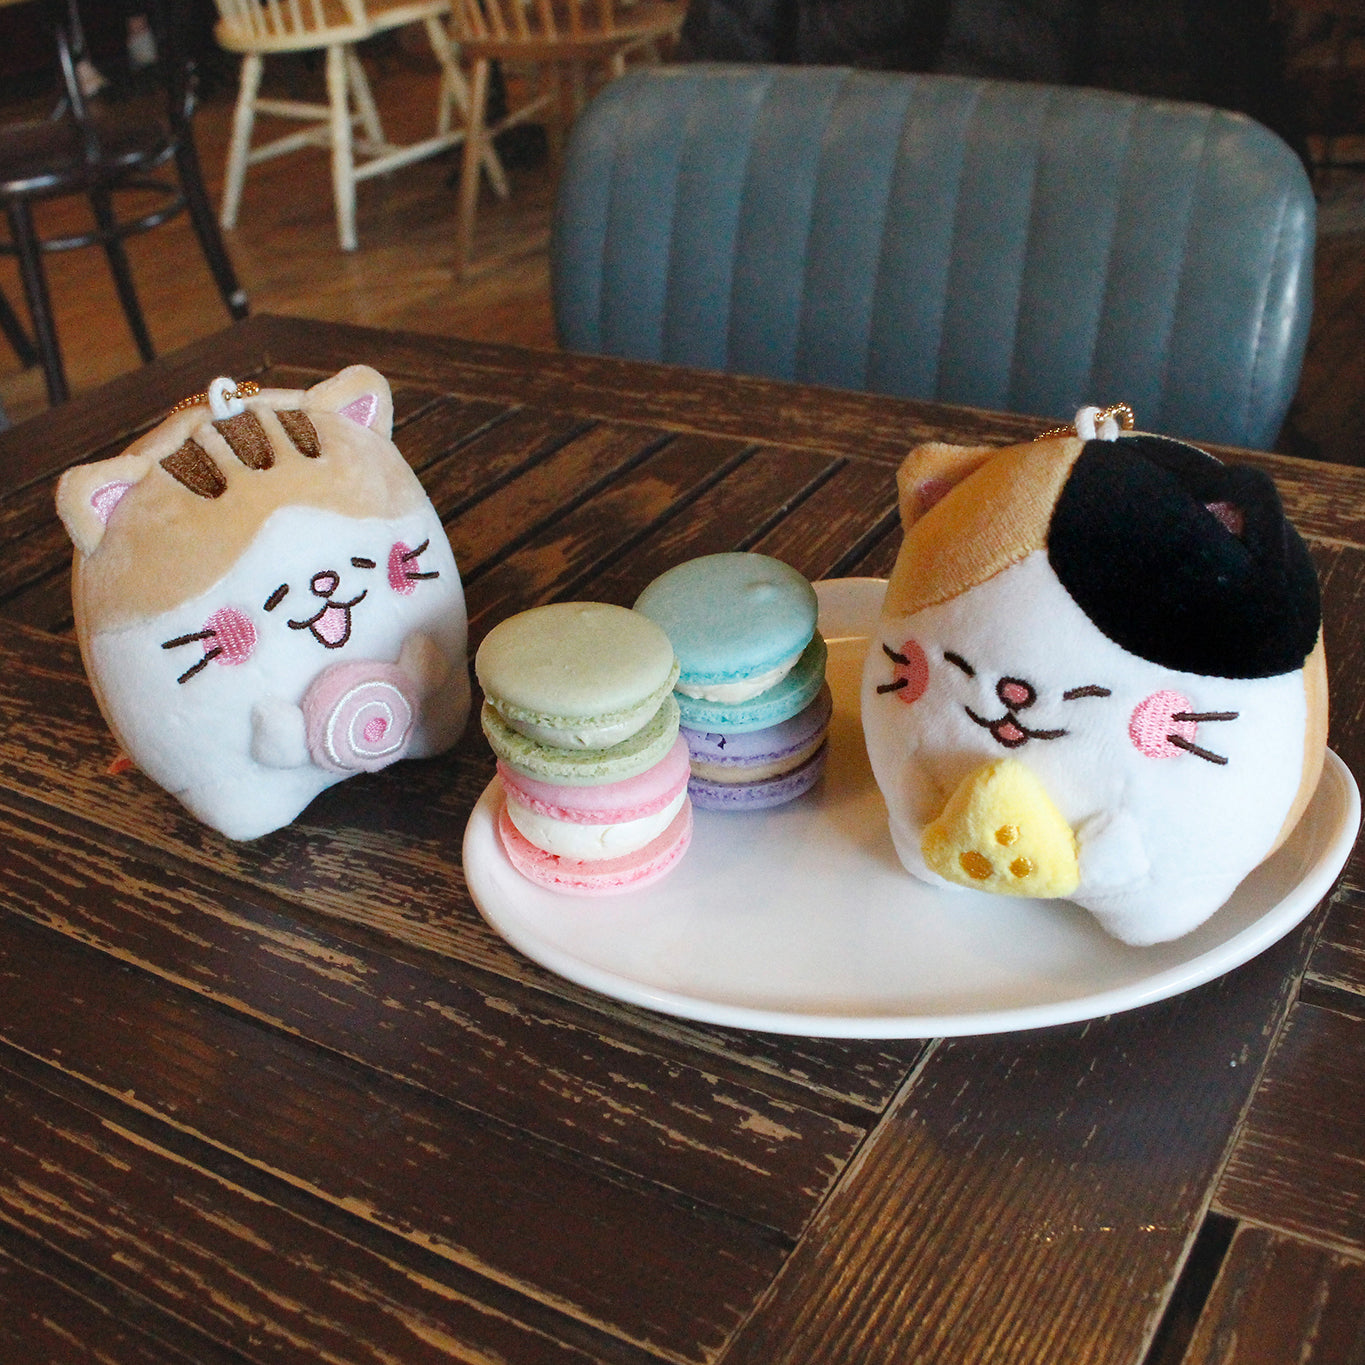 Two keyring plushes on a cafe table. Calico holds plush cheese while sitting on a plate with four multicolored macarons. Tan and white keyring cat sits beside the plate enjoying a plush pink cake roll.